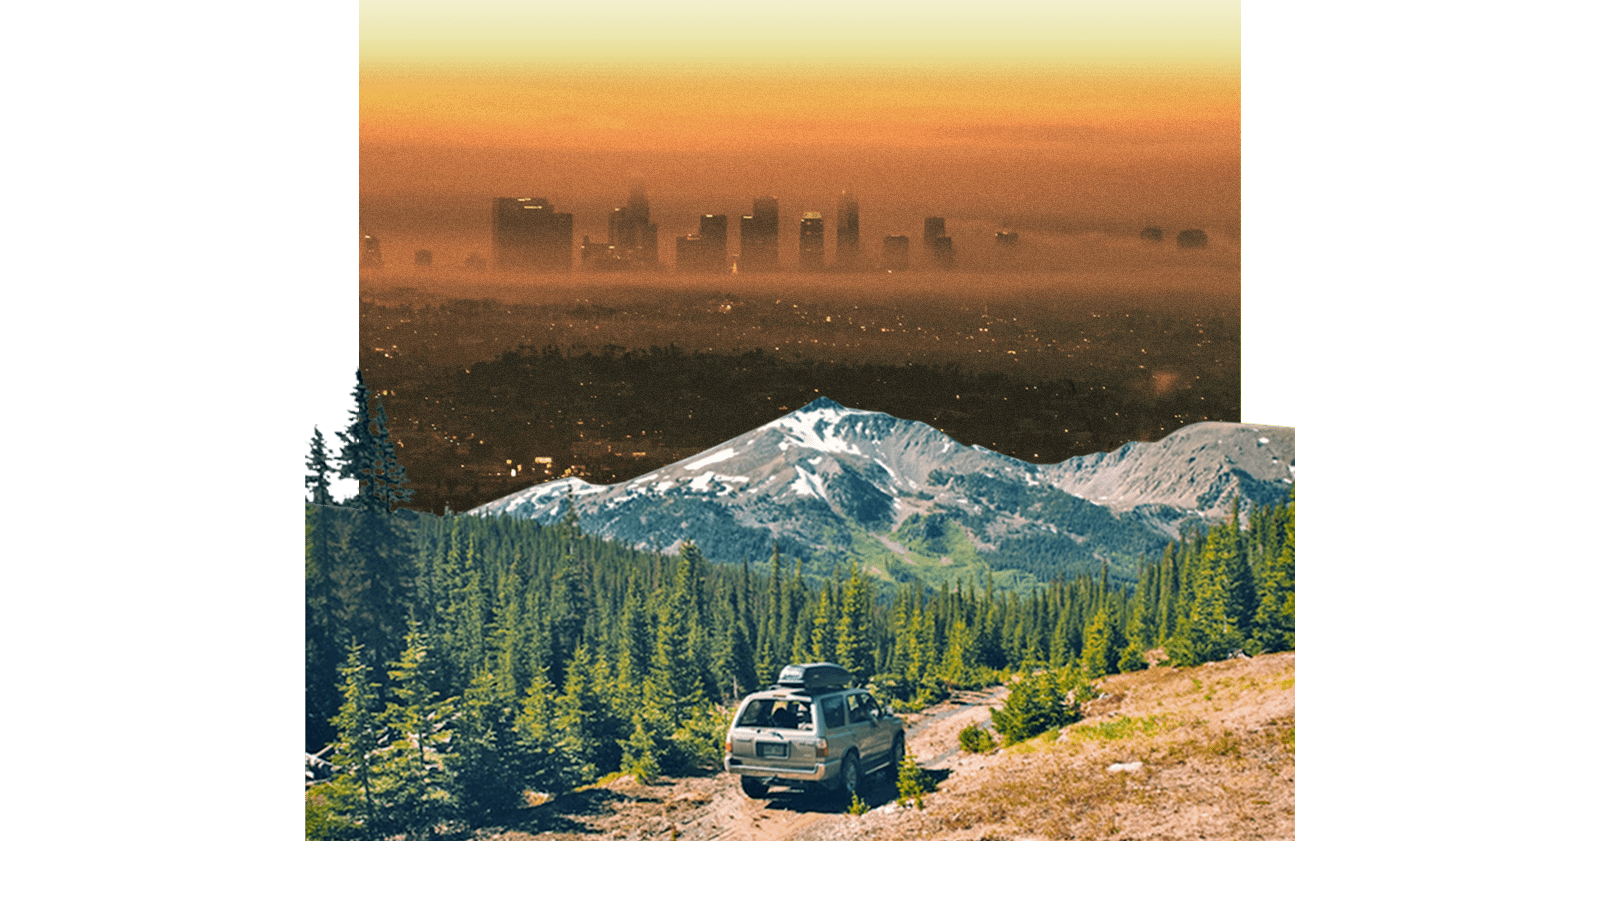 Collage: SUV driving in nature with trees and mountains in distance, with a photo of a smog covered city rising beyond the mountains